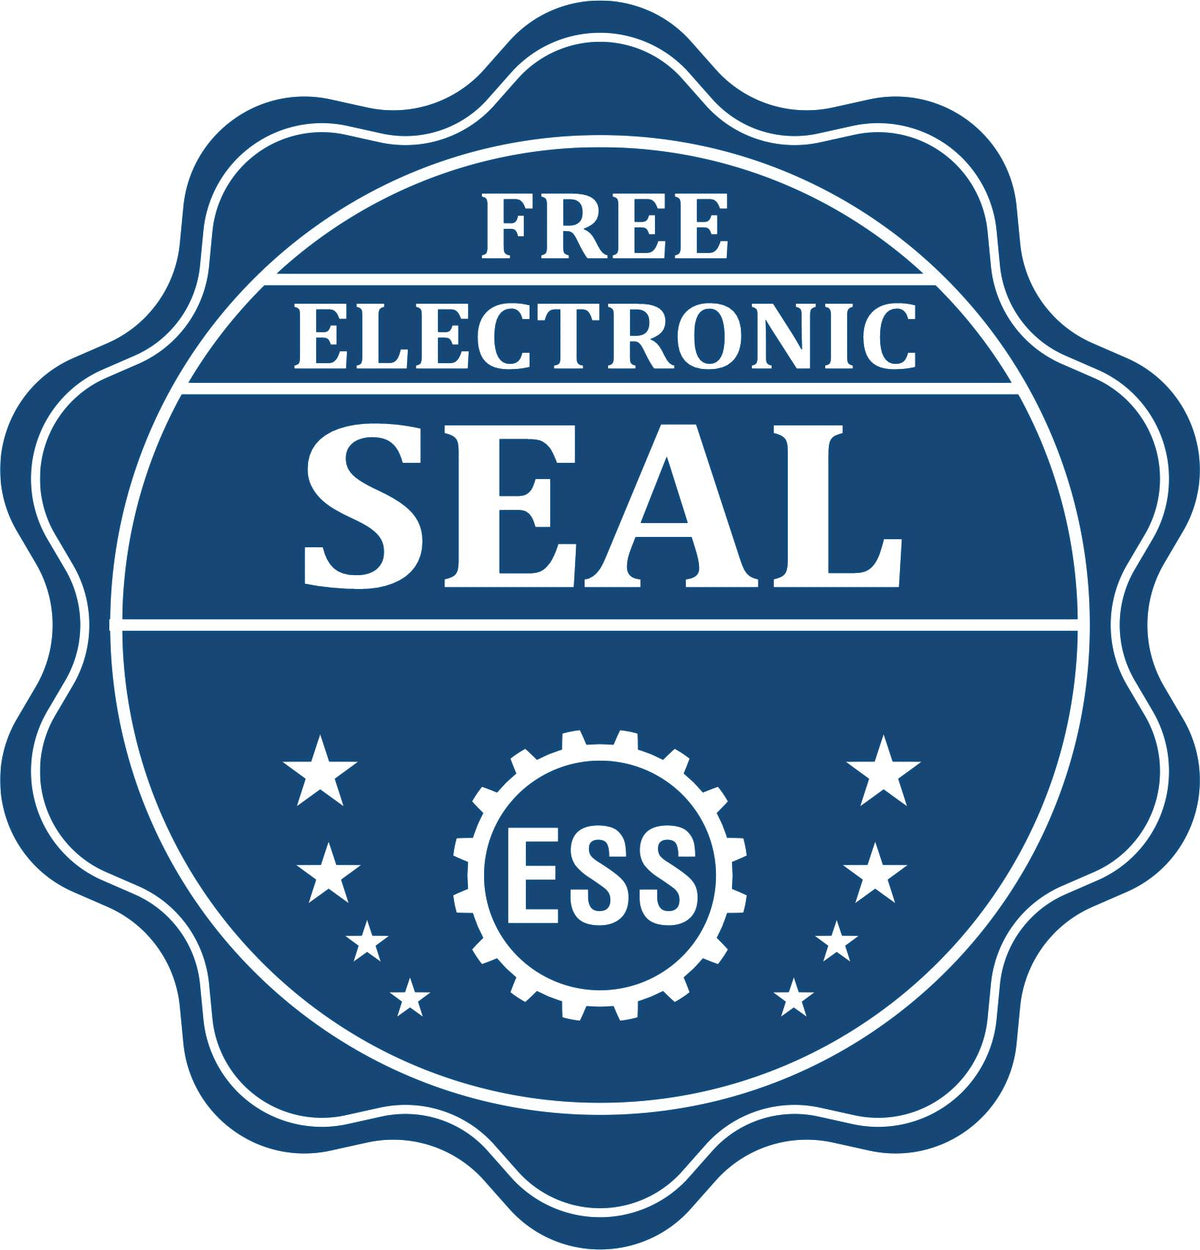 A badge showing a free electronic seal for the Heavy-Duty Texas Rectangular Notary Stamp with stars and the ESS gear on the emblem.